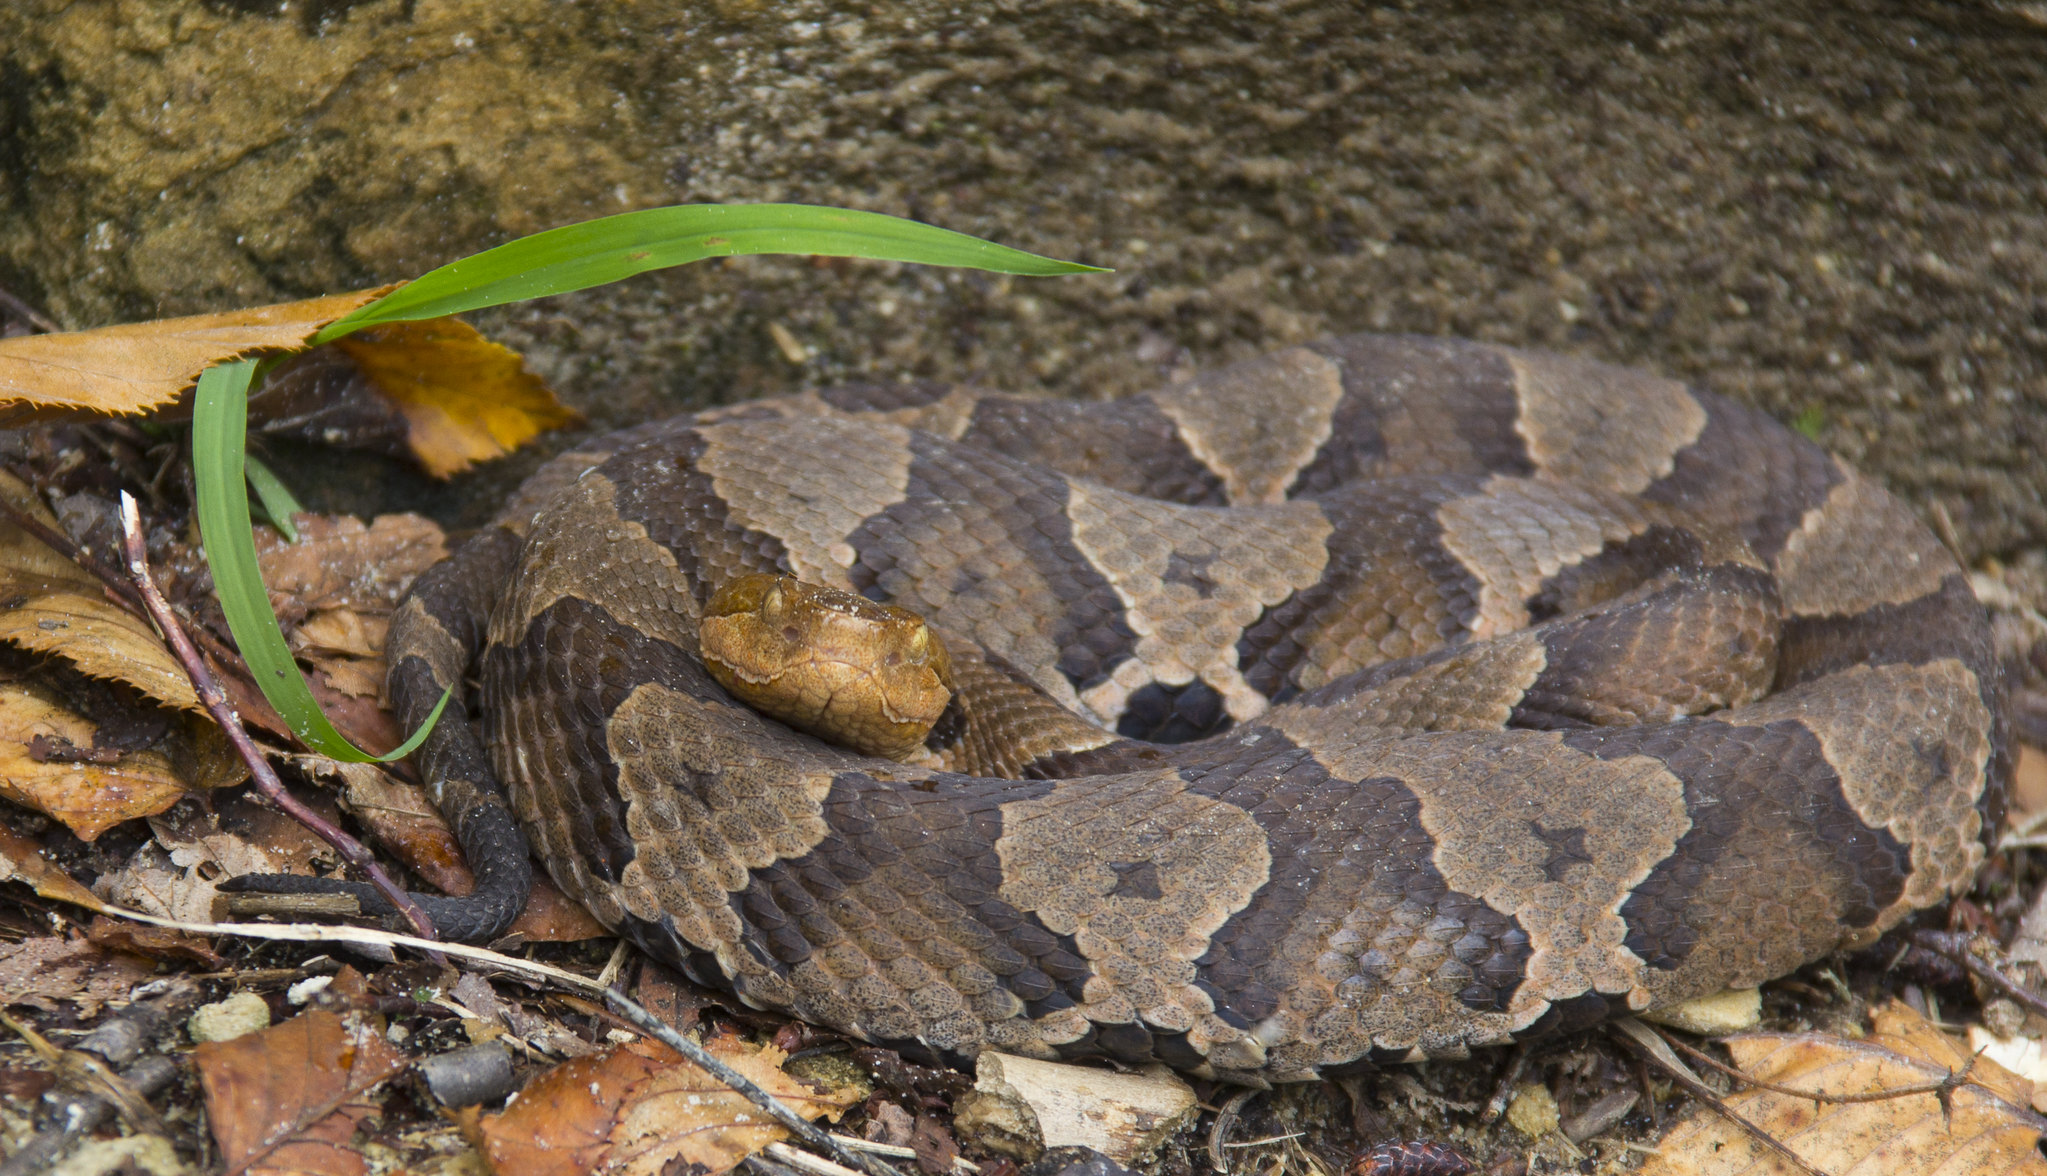 Be On The Look Out For Venomous Snakes In Kentucky